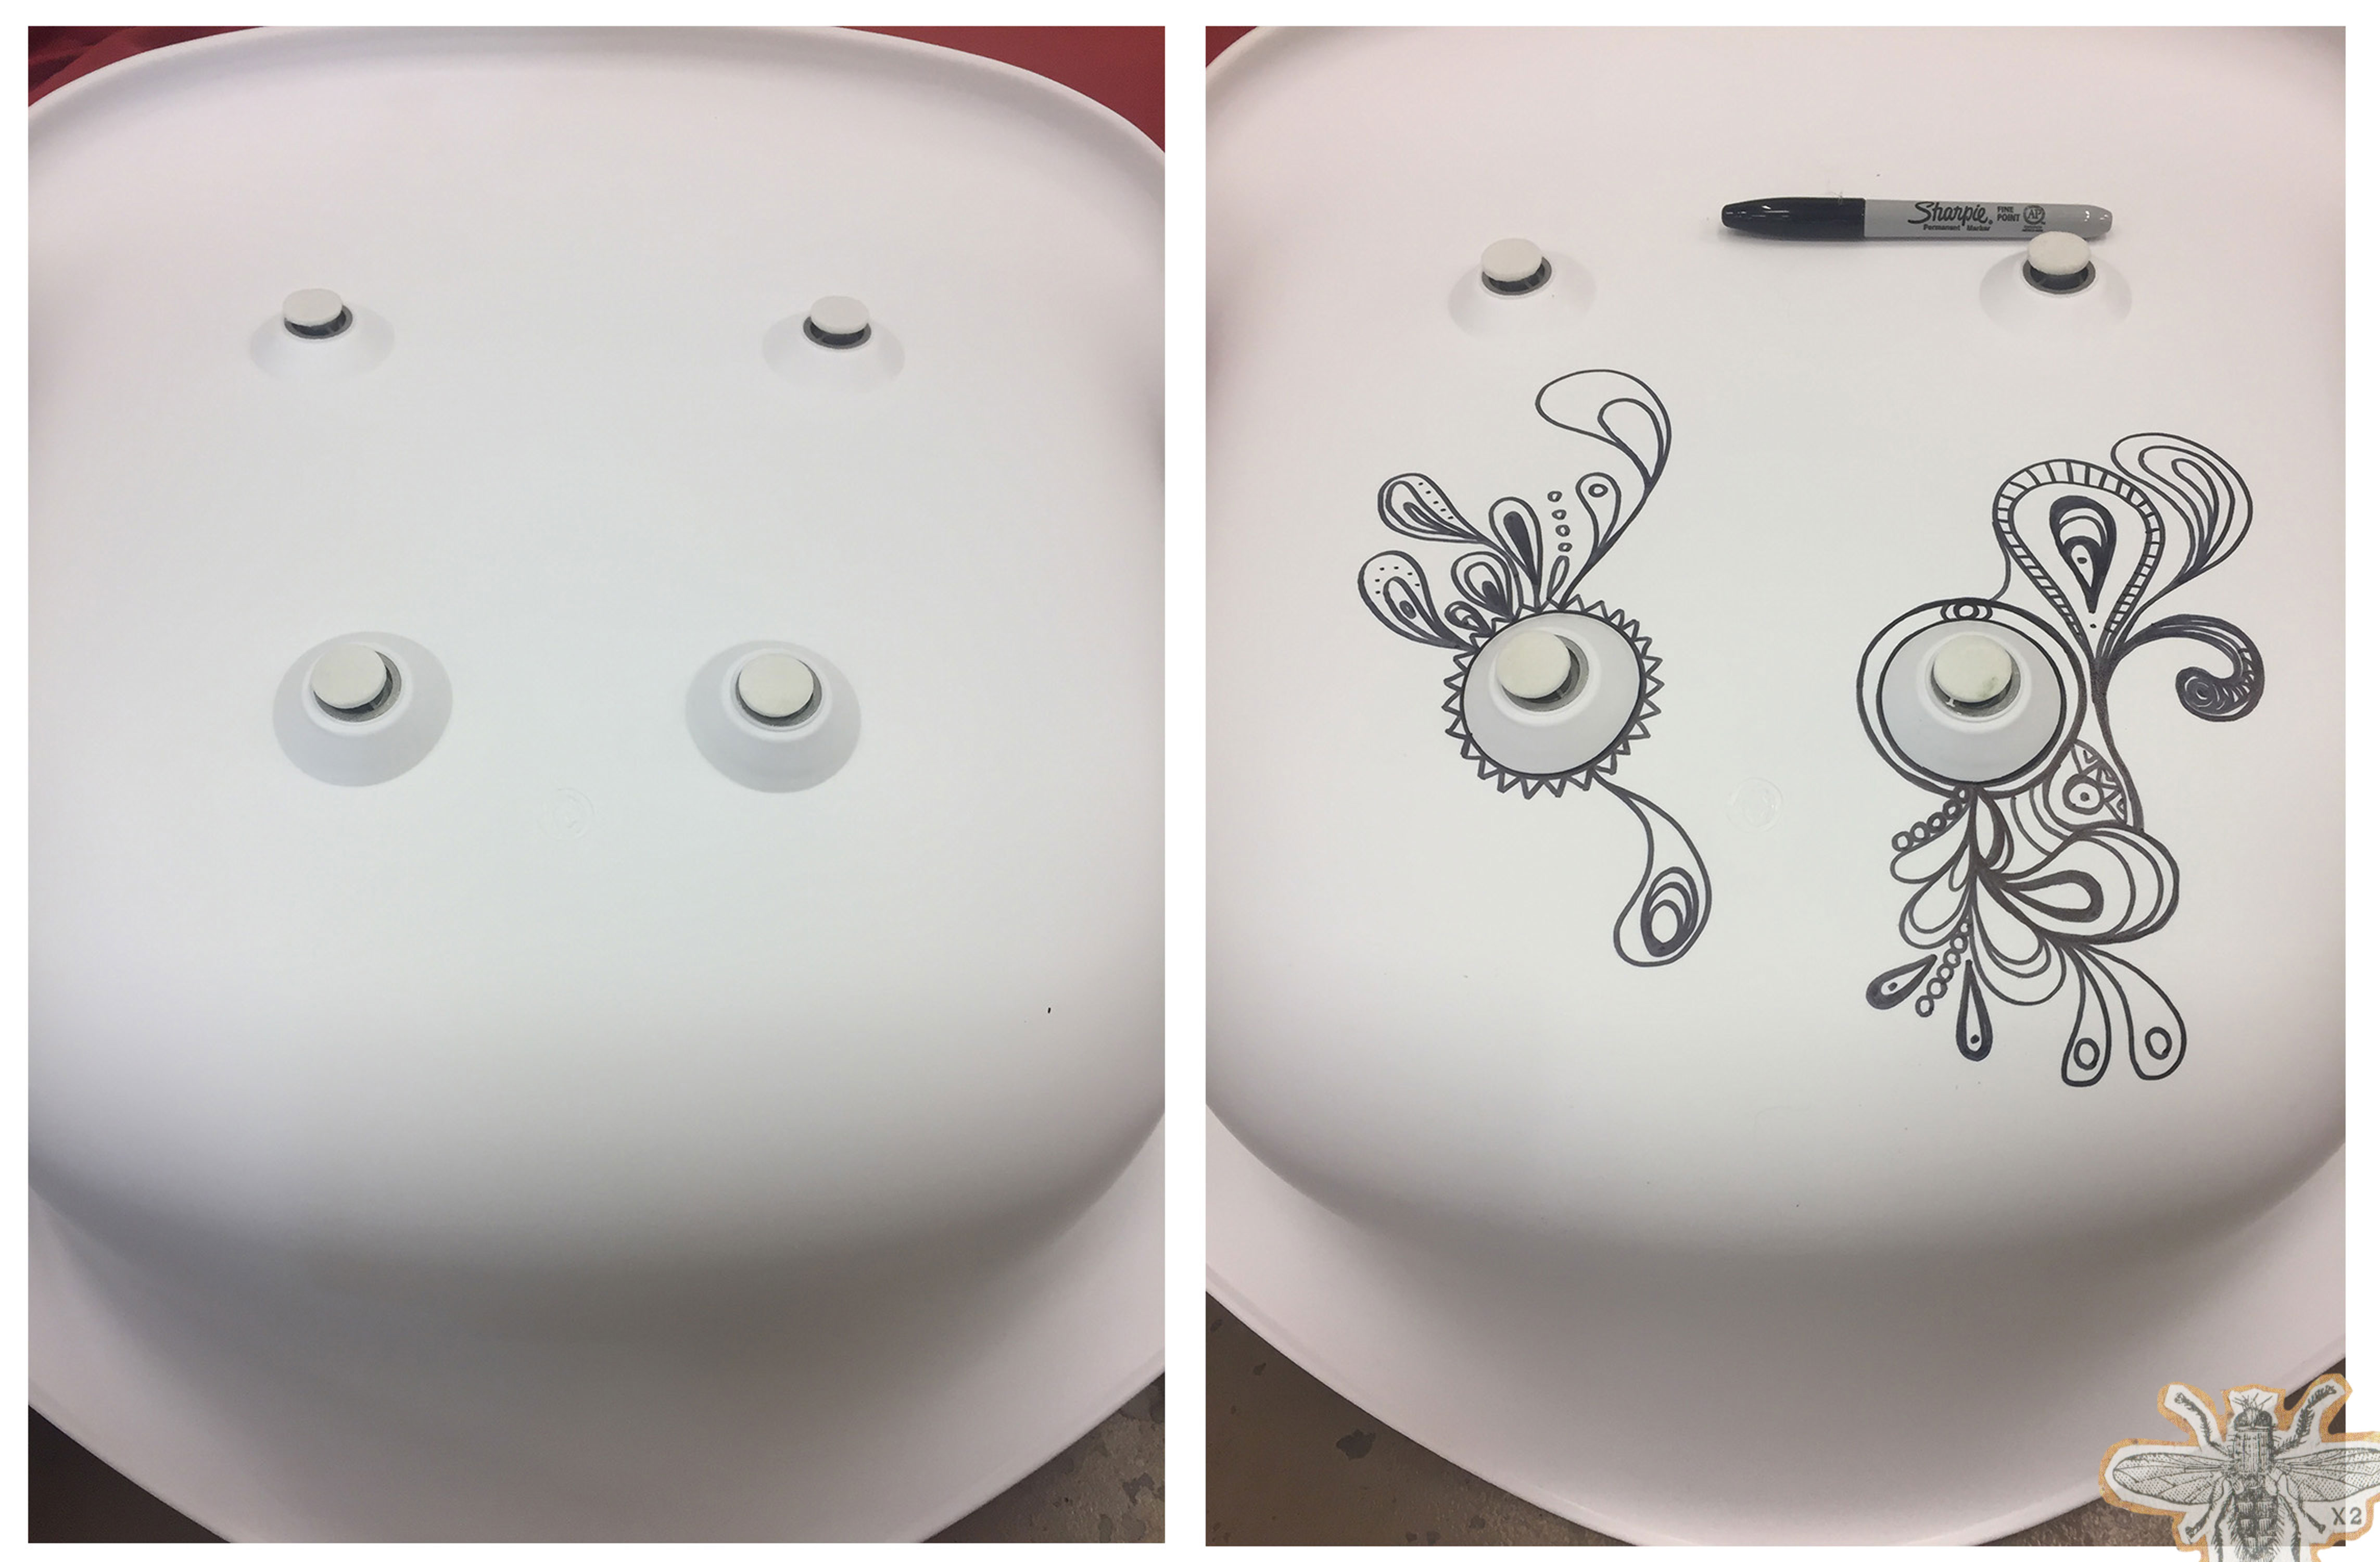 Two modern white chairs that have been decorated with Sharpie doodles.